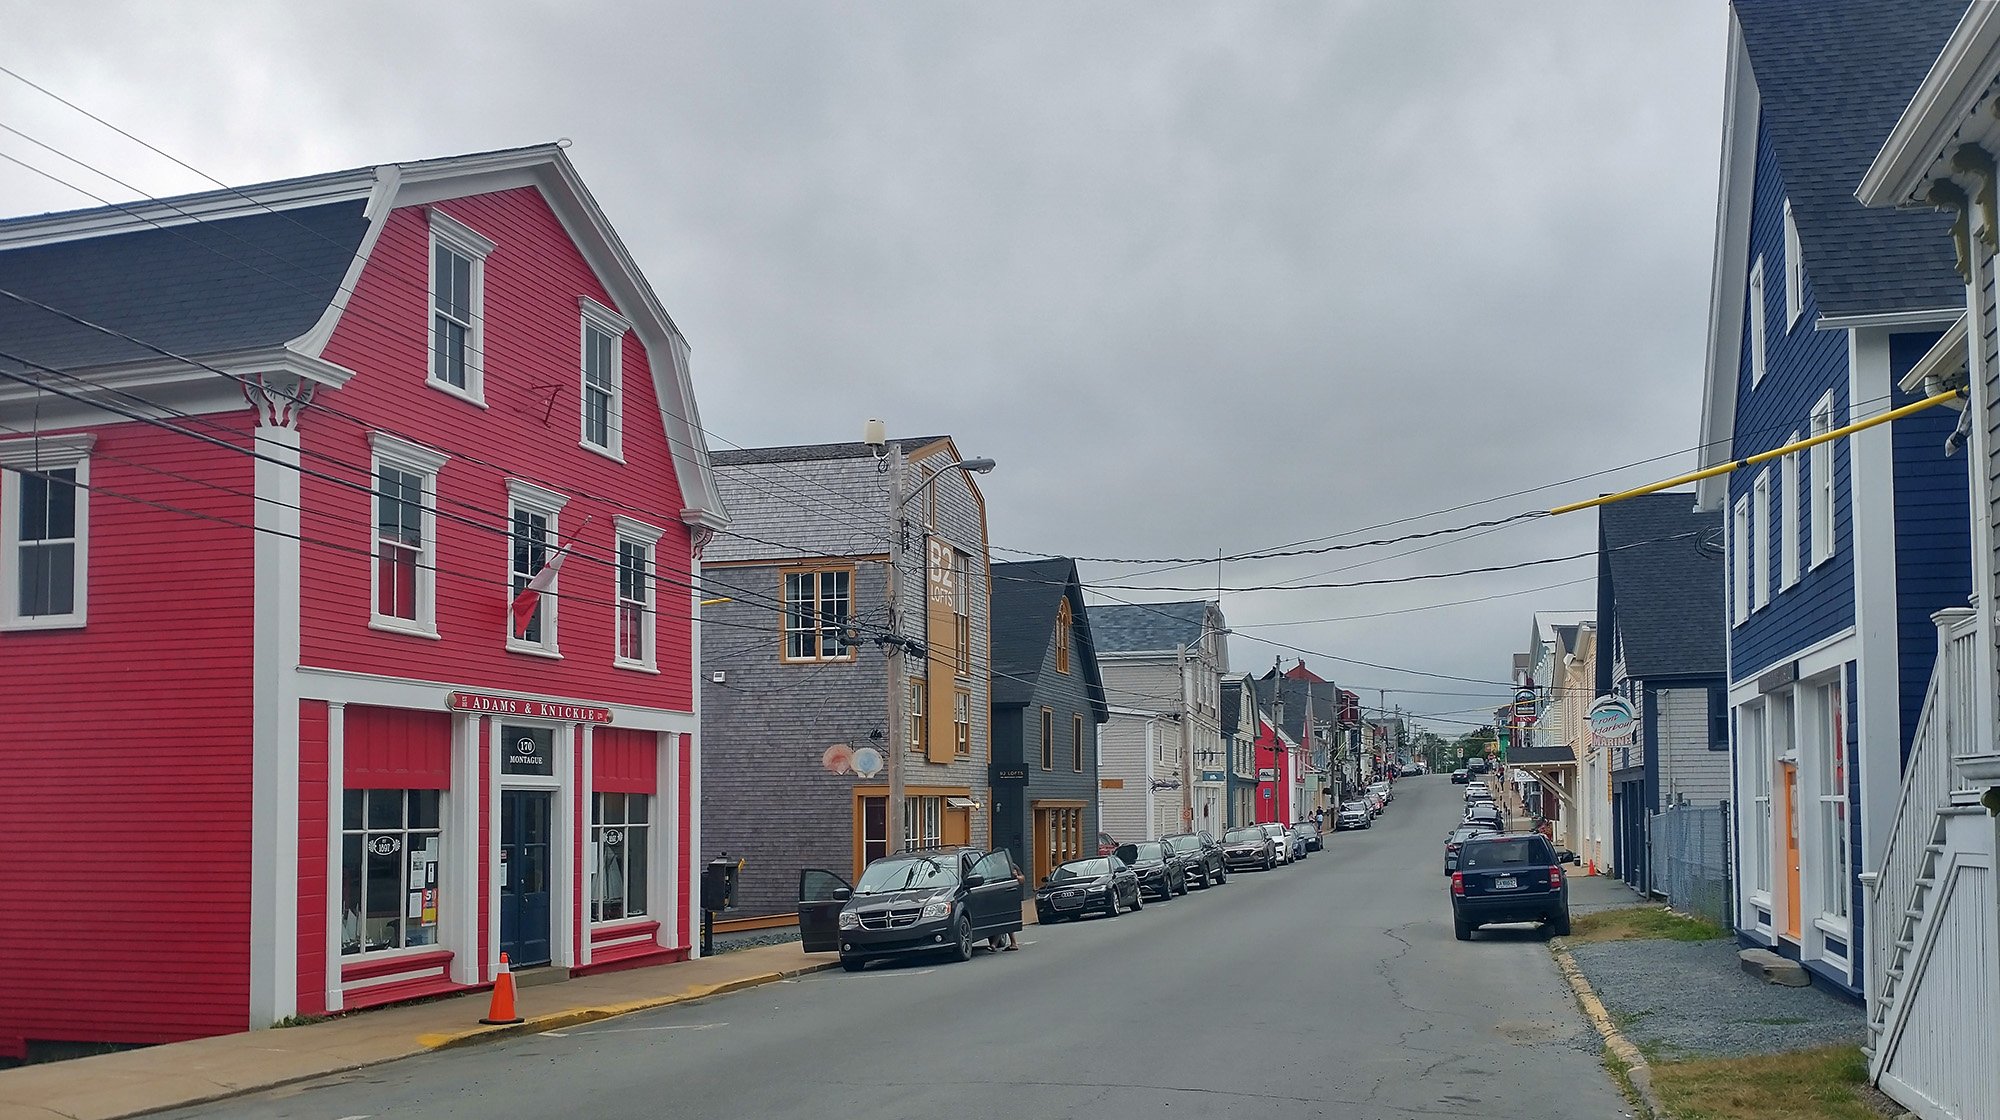 The town has a few old timey streets near the harbor.